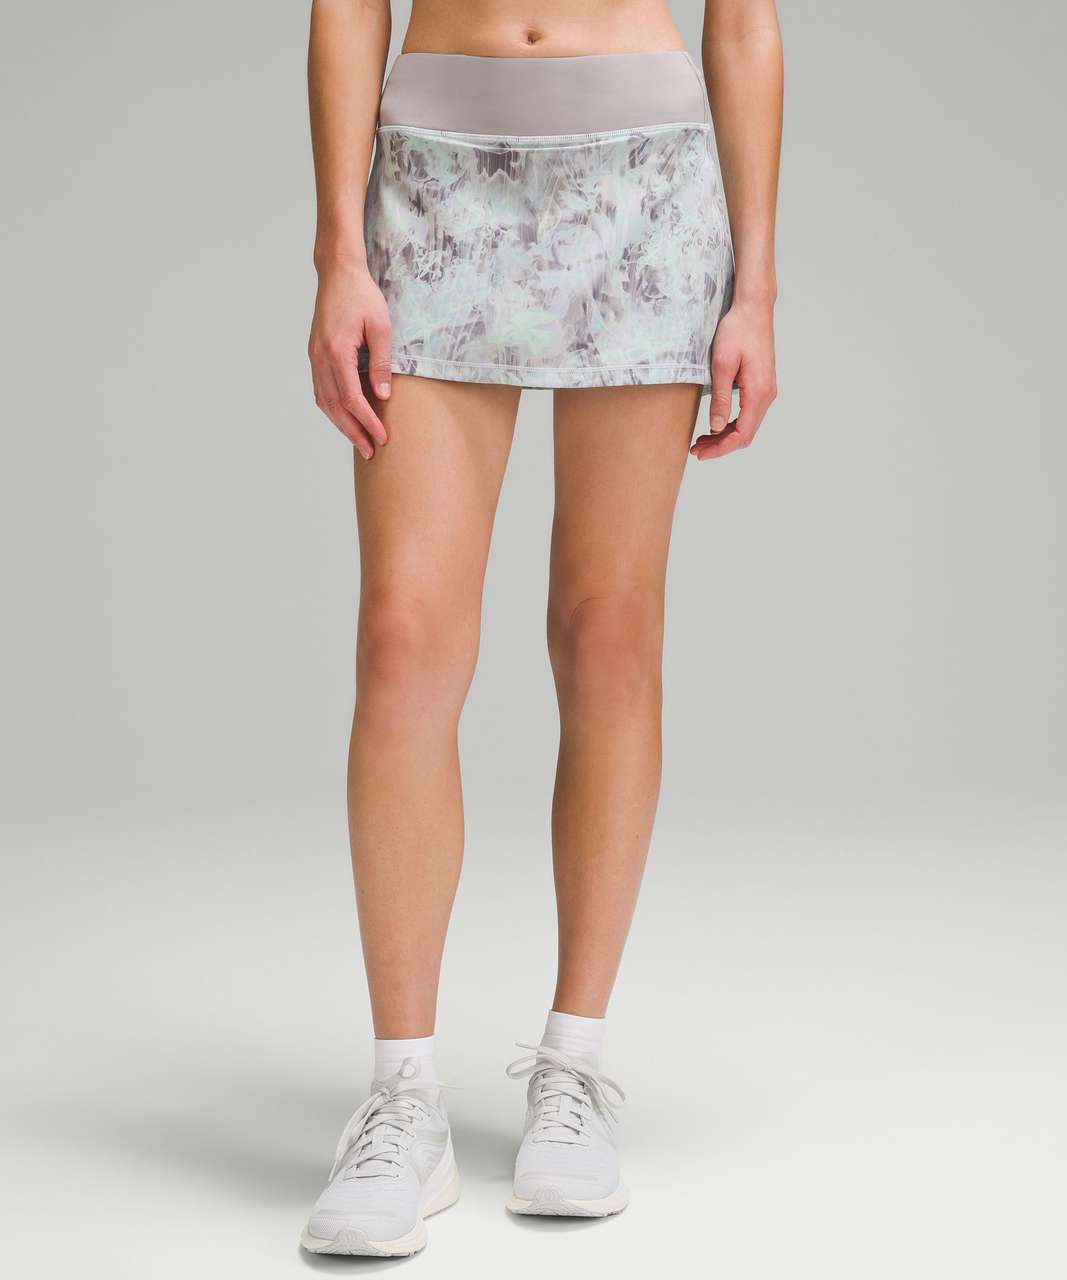 Plissè Mini Skirt with Inner Shorts – Riviere